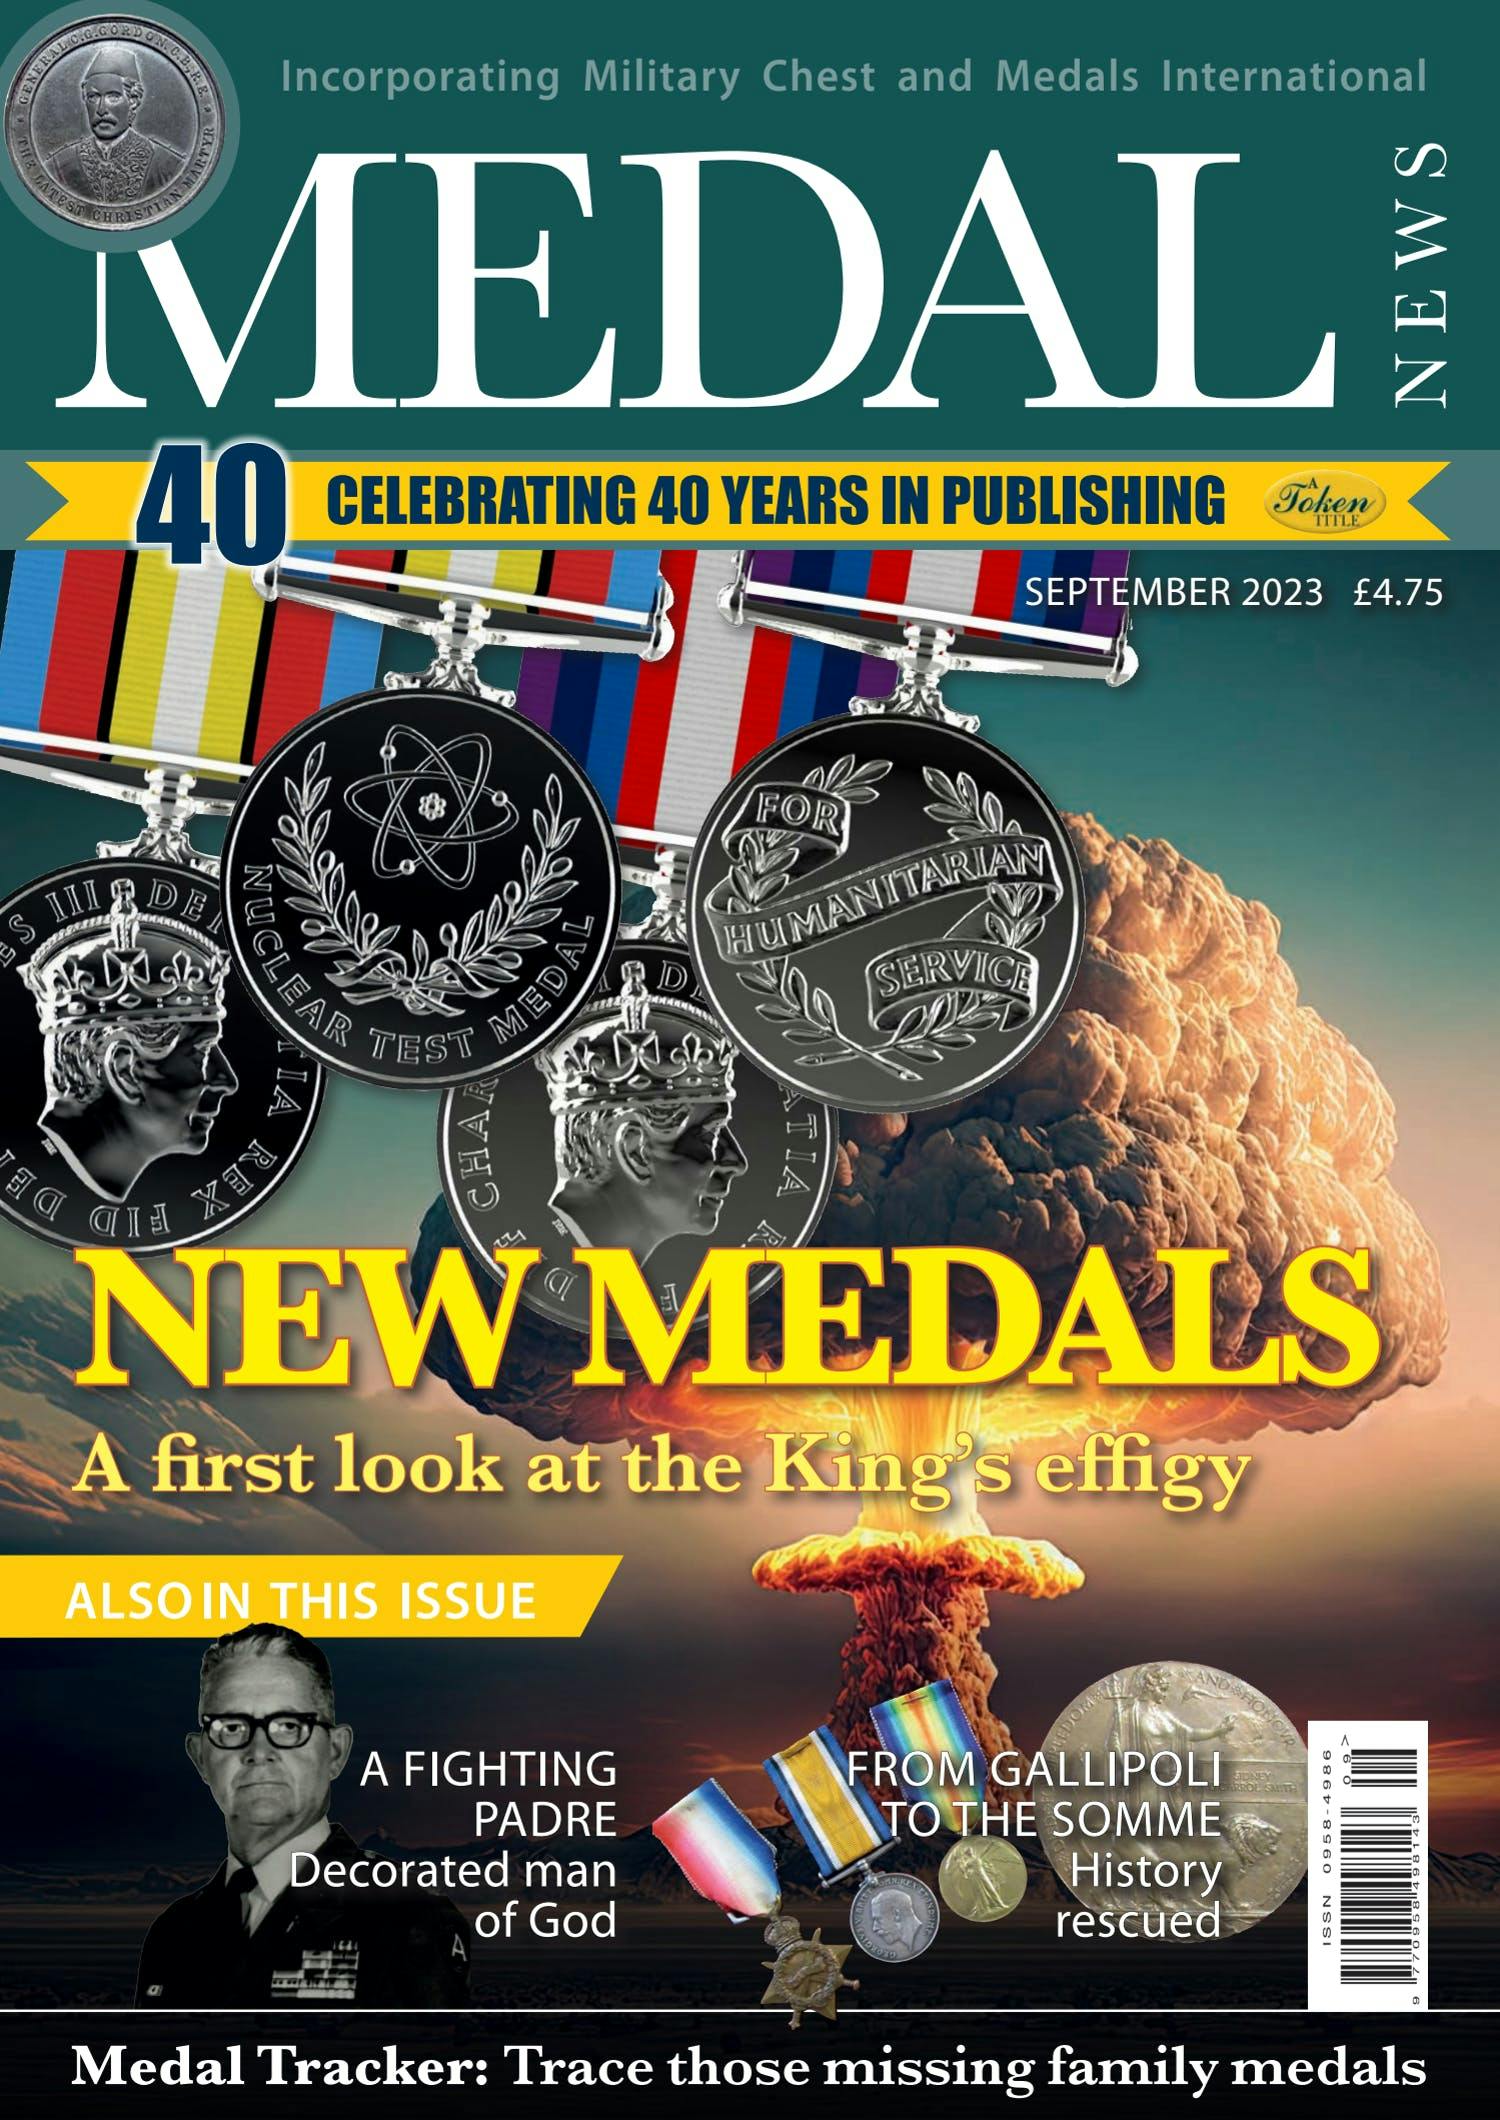 The front cover of Medal News, Volume 61, Number 8, September 2023